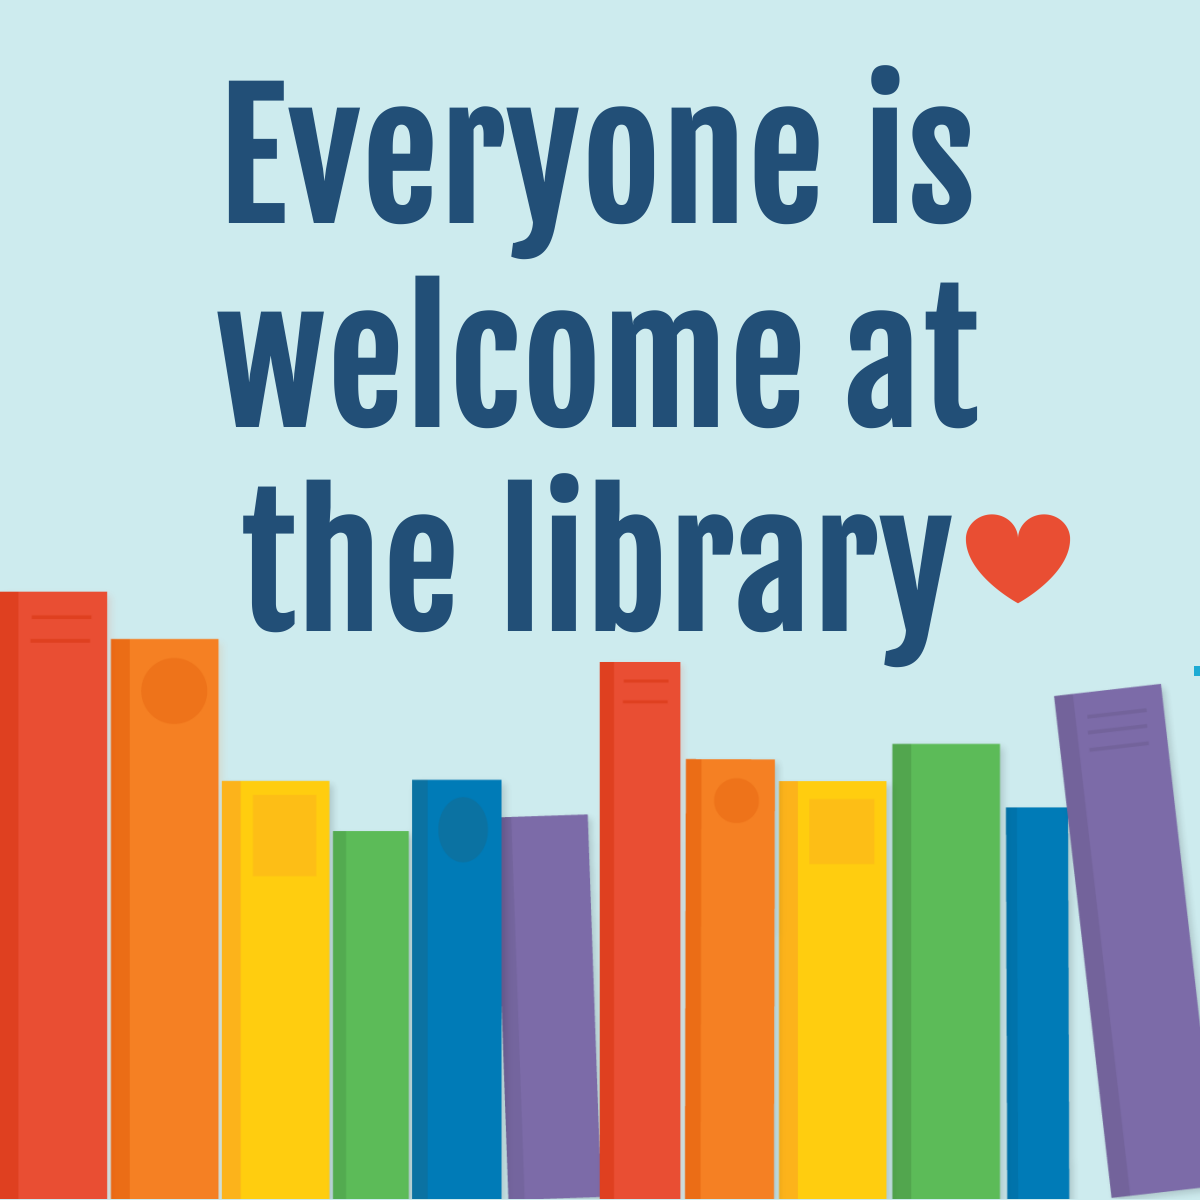 Everyone is welcome at the library